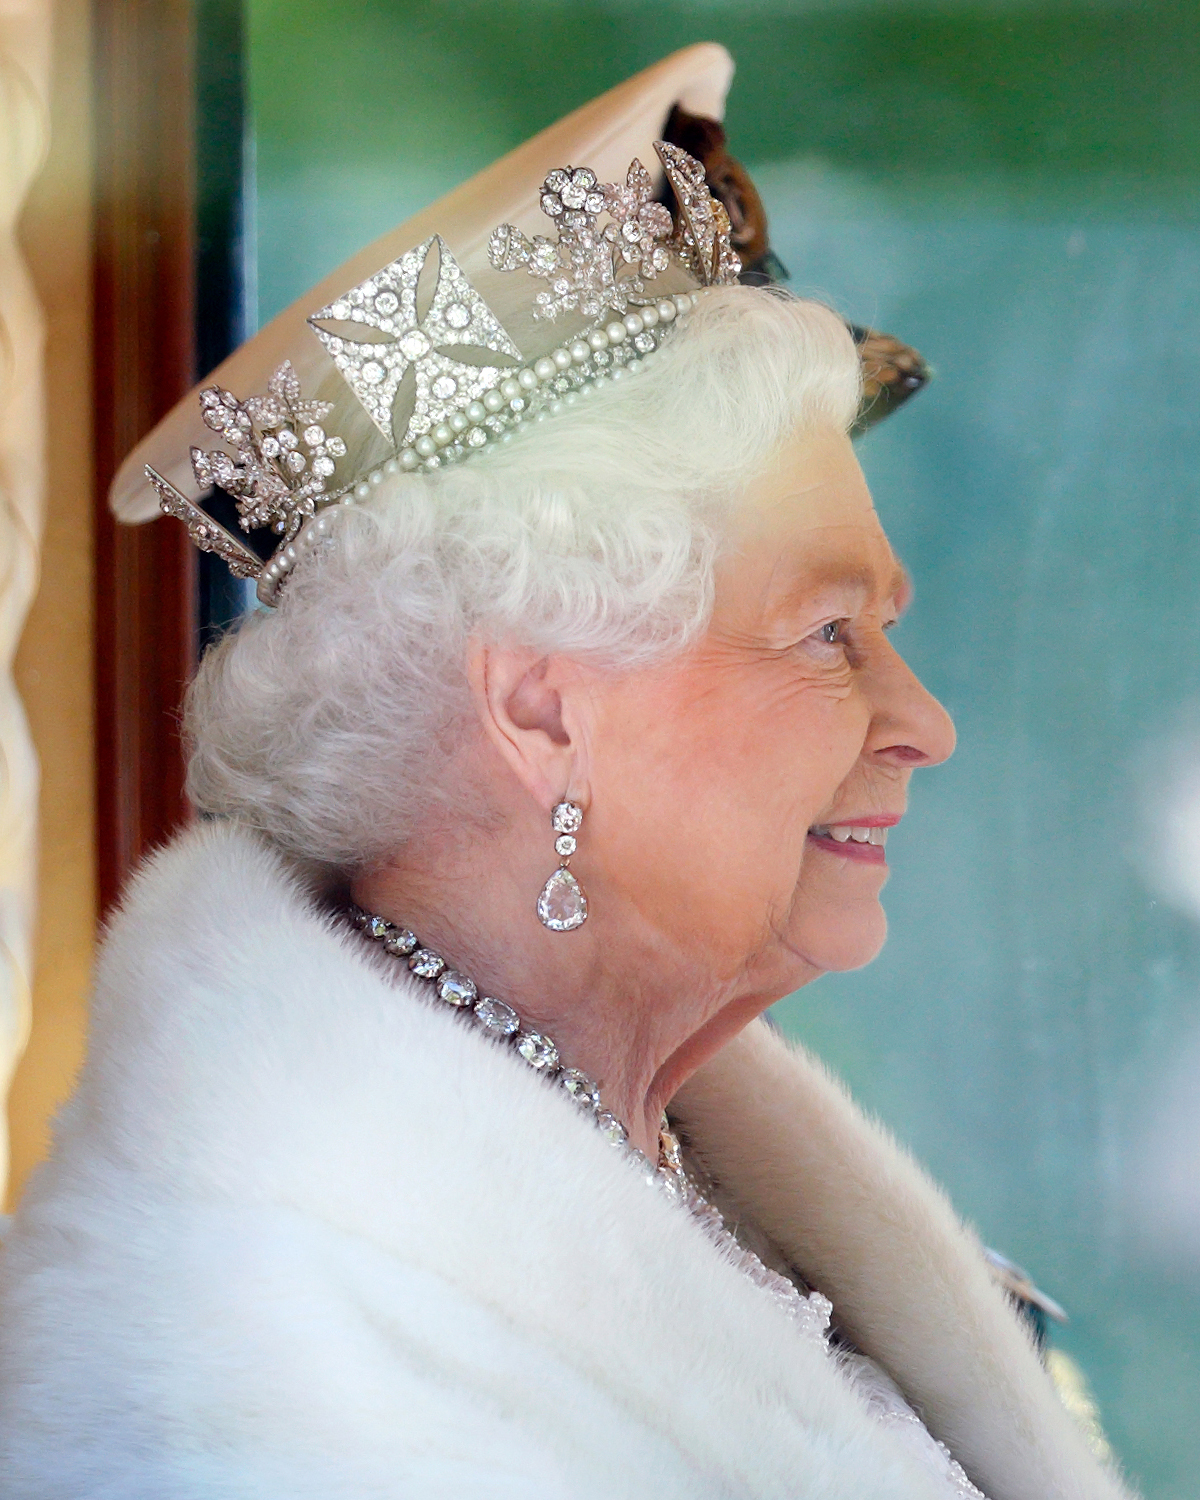 Queen S Platinum Jubilee Facts About The Coronation Diamond Jewelry